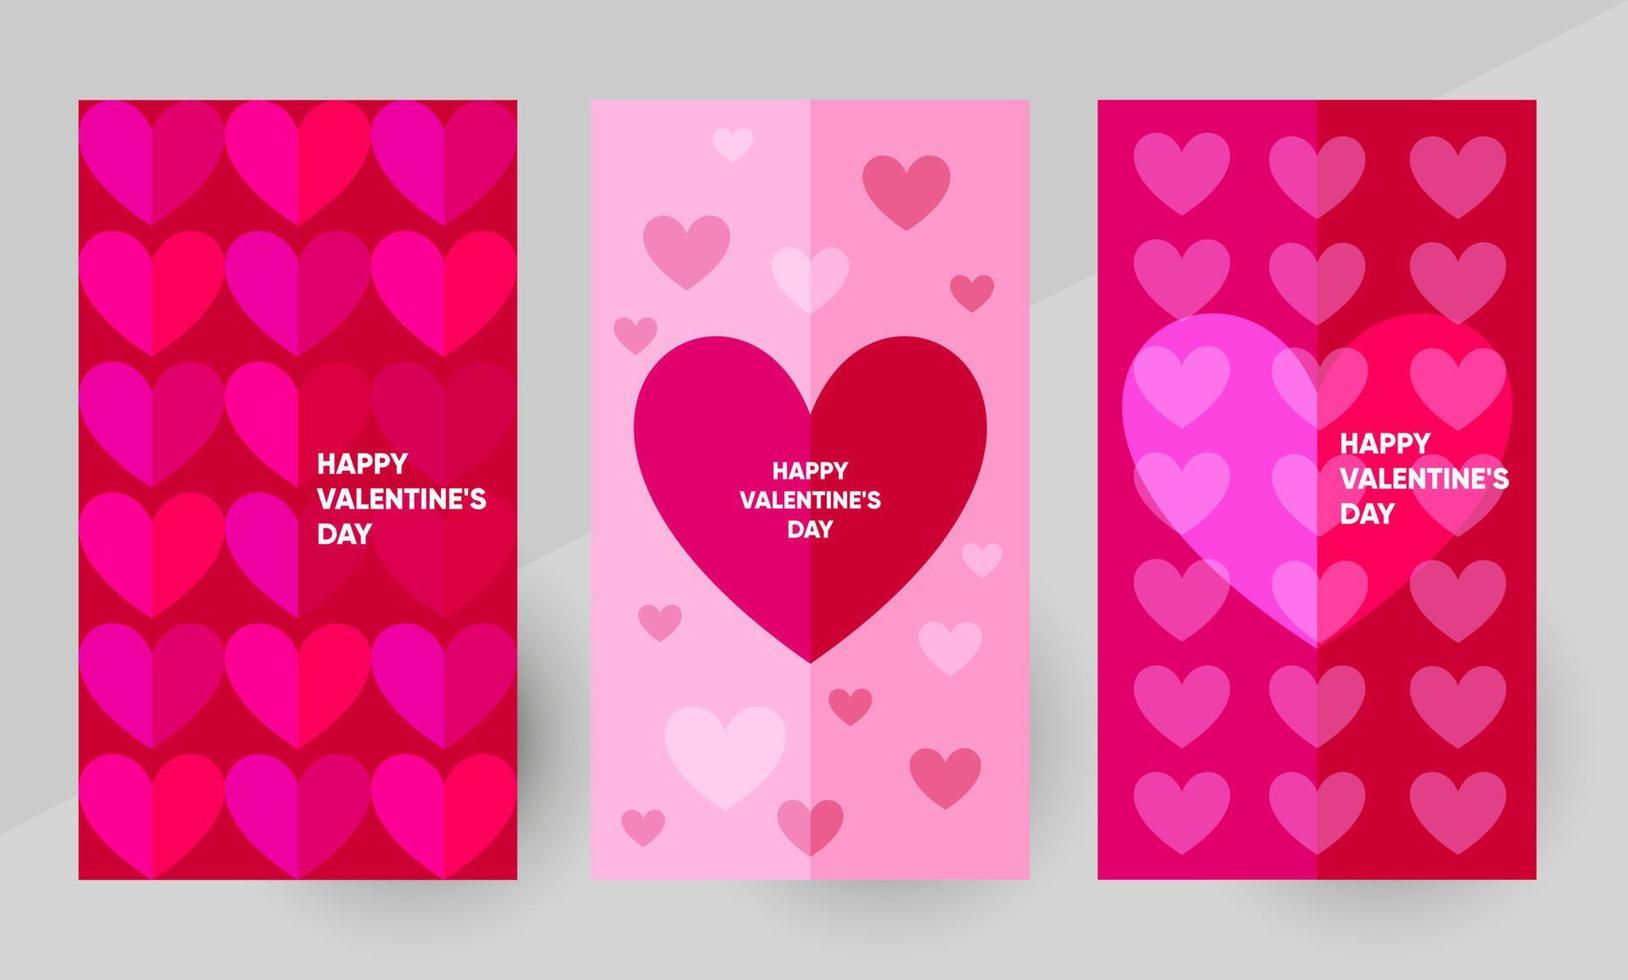 Happy Valentines day vector banner, social media stories template, background design. Vector illustration in vivid colors.